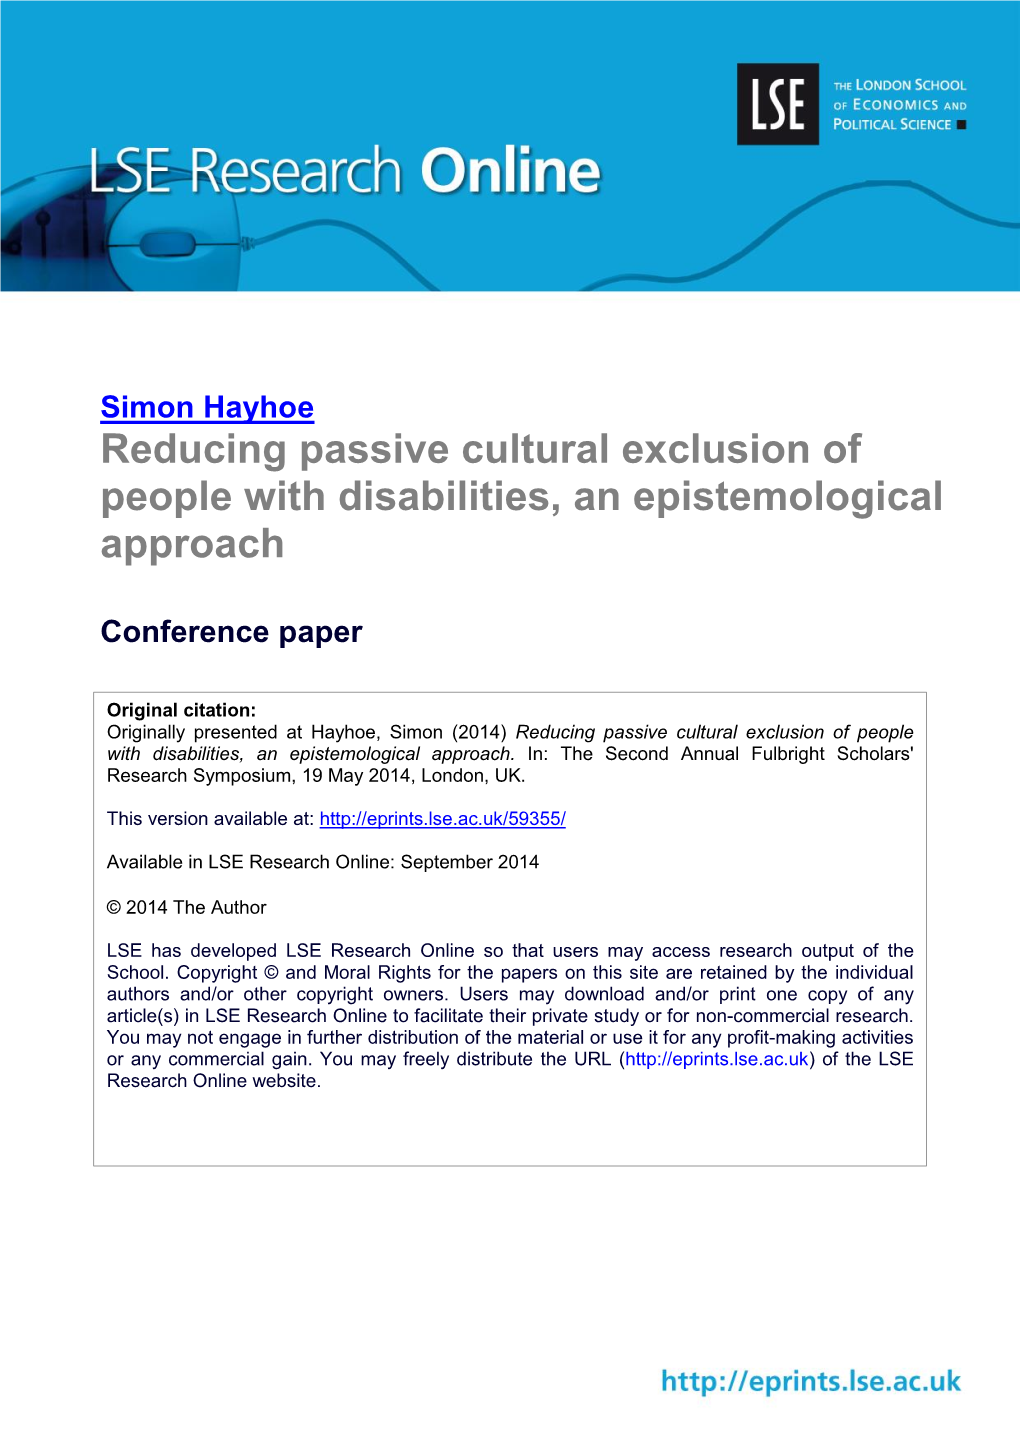 Reducing Passive Cultural Exclusion of People with Disabilities, an Epistemological Approach